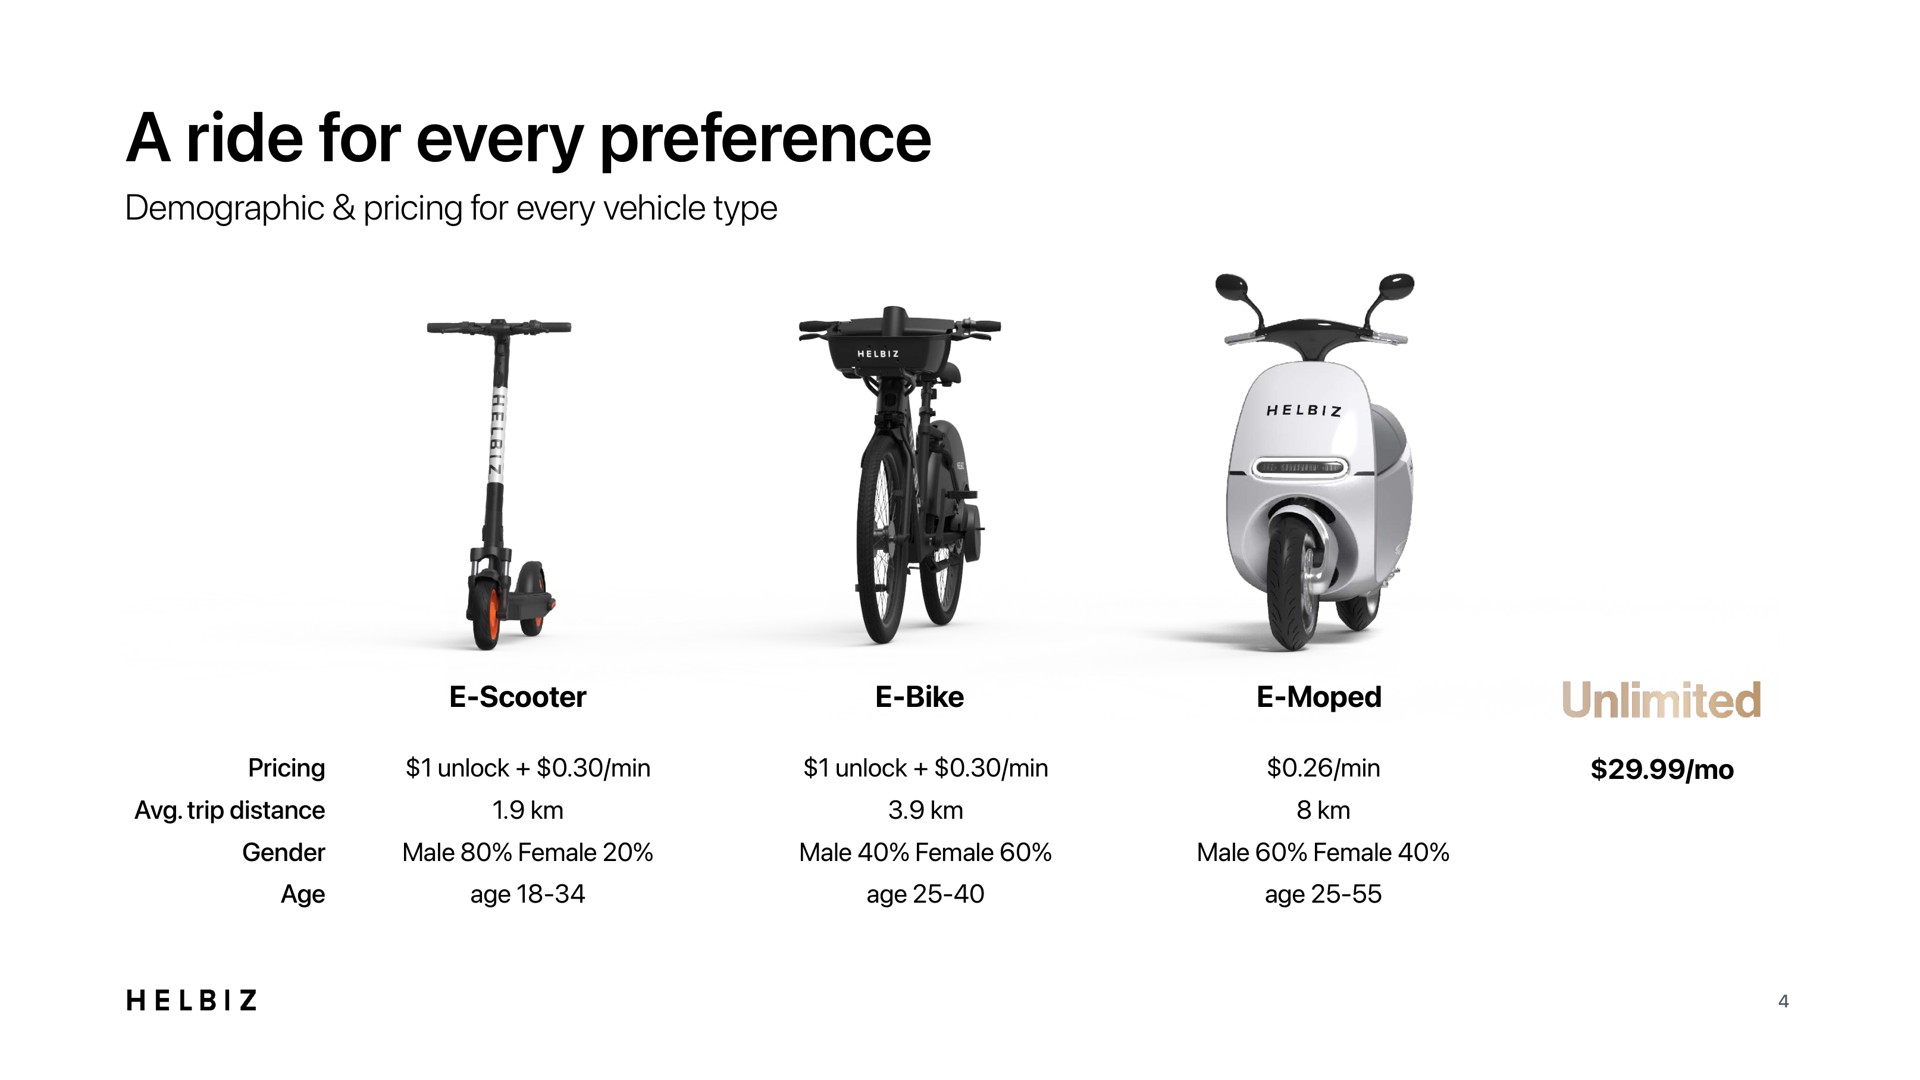 a ride for every preference | Helbiz